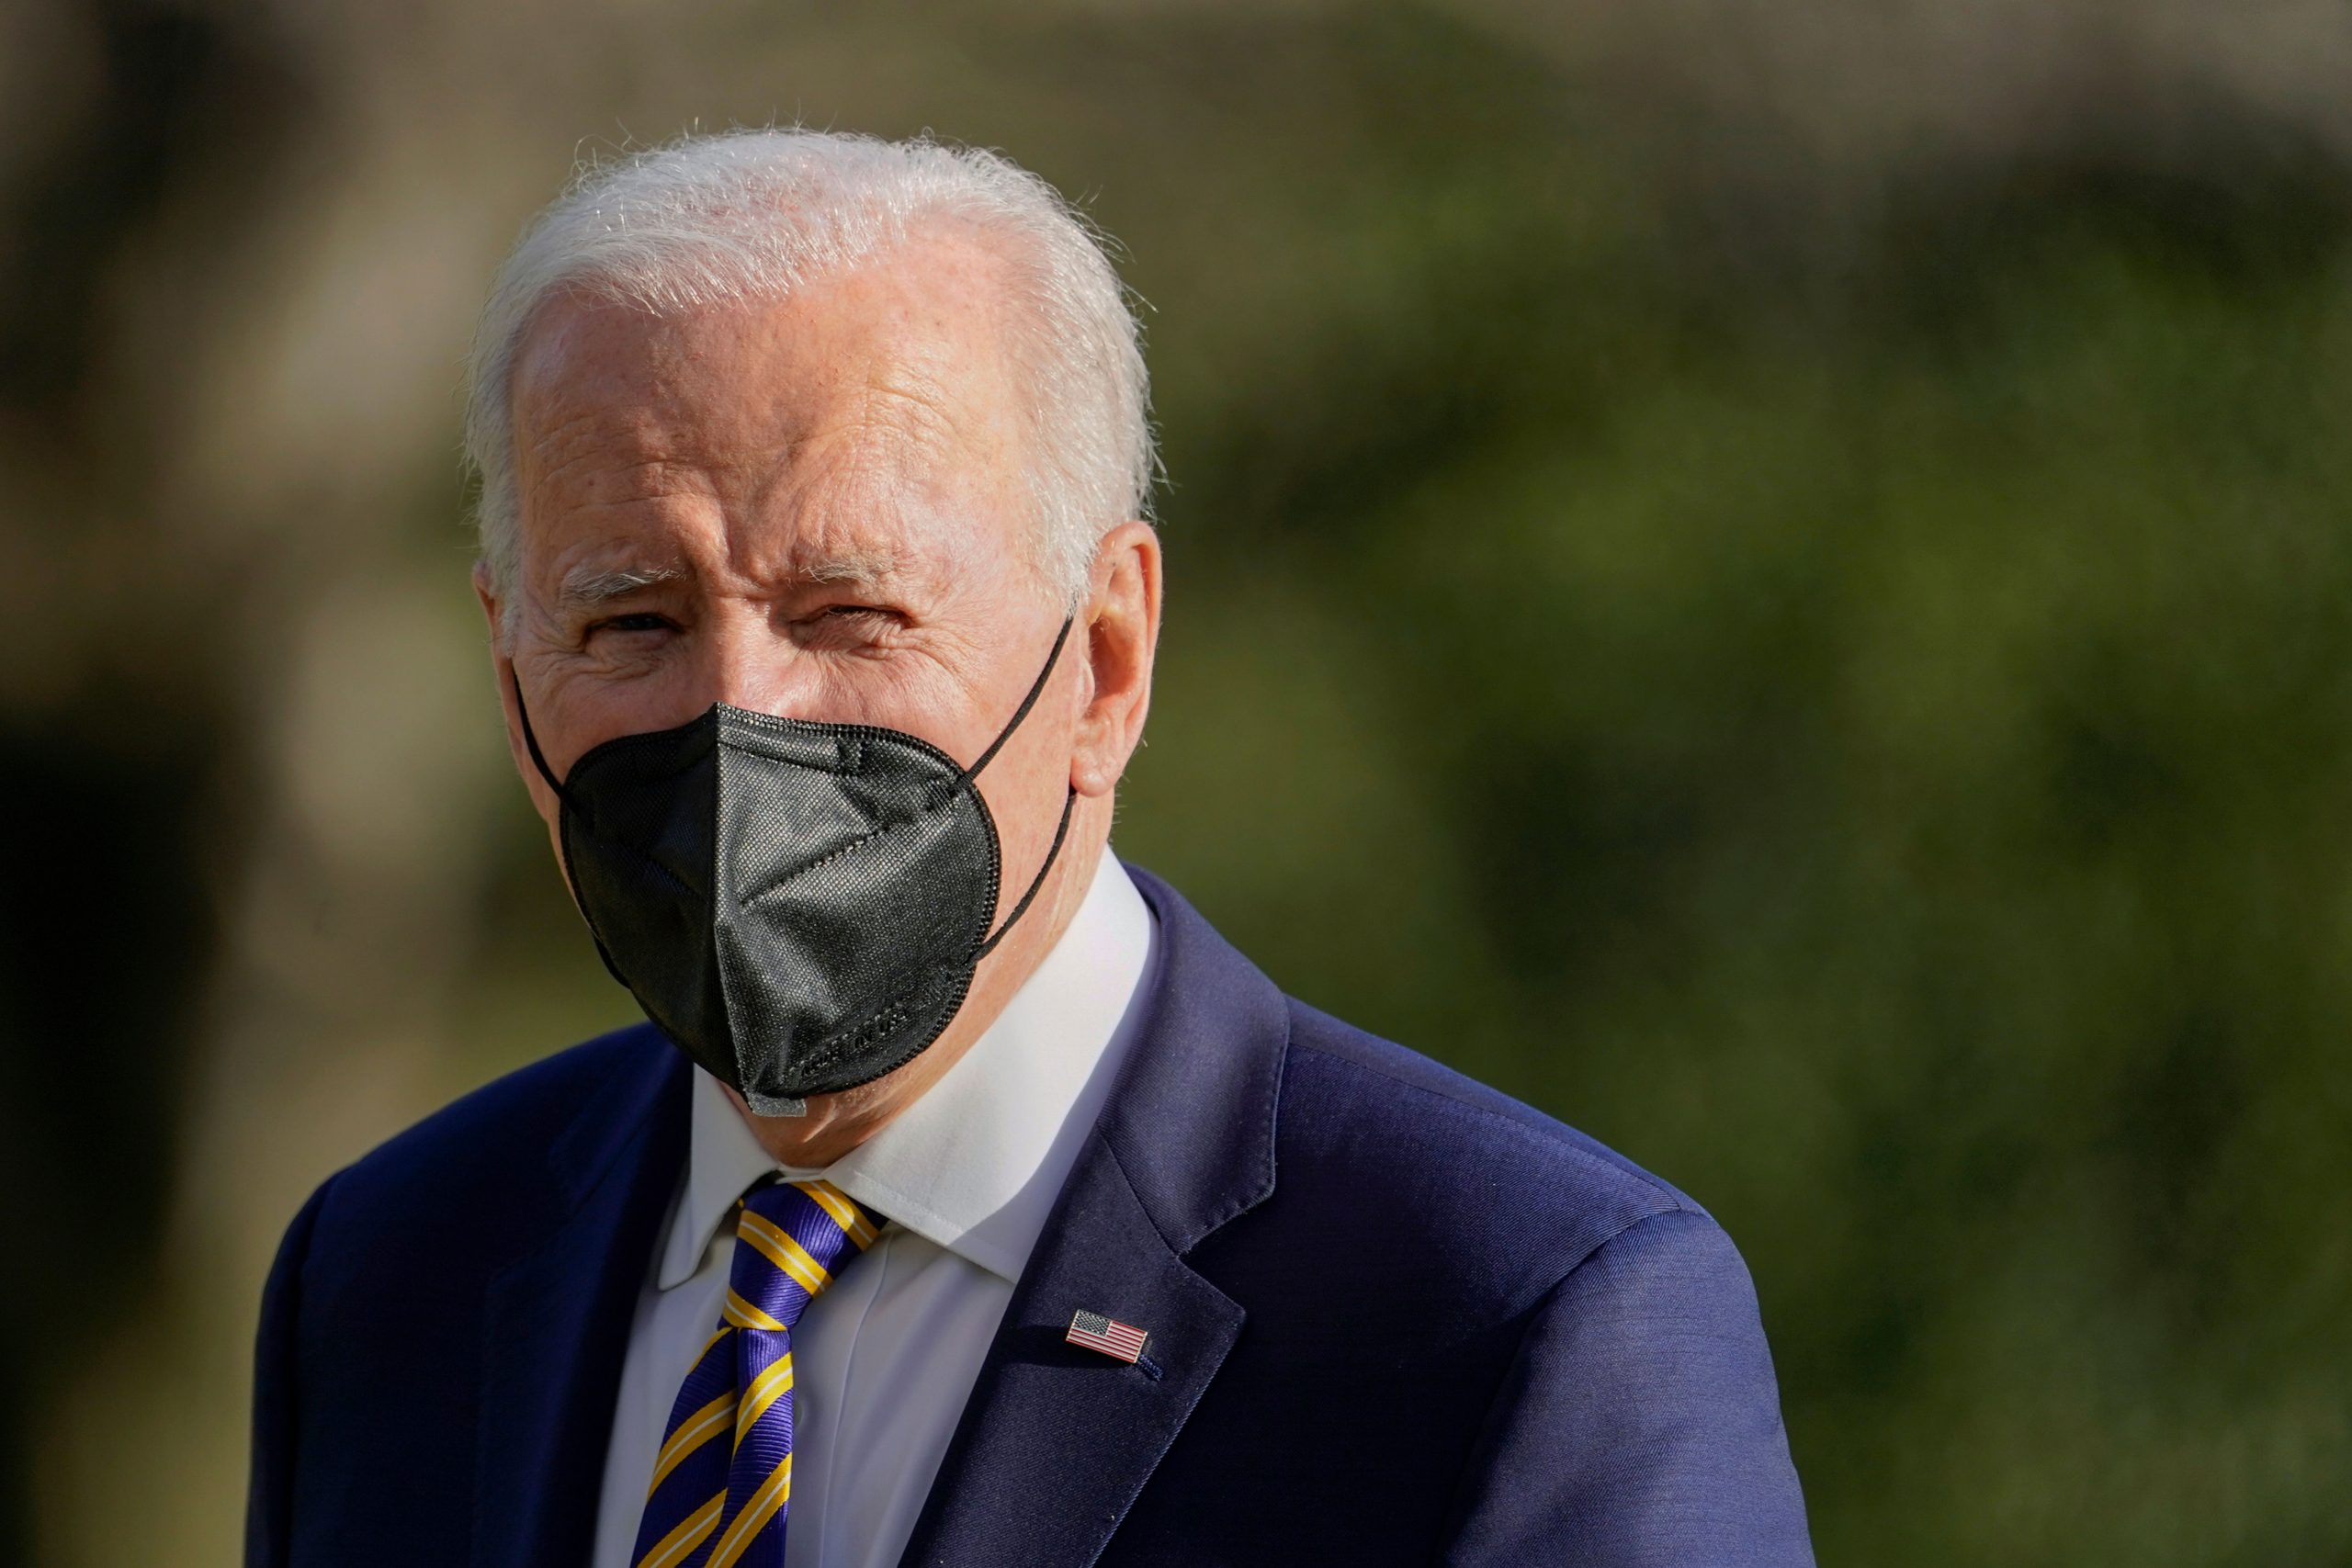 Joe Biden will take second booster shot after medical consultation: White House